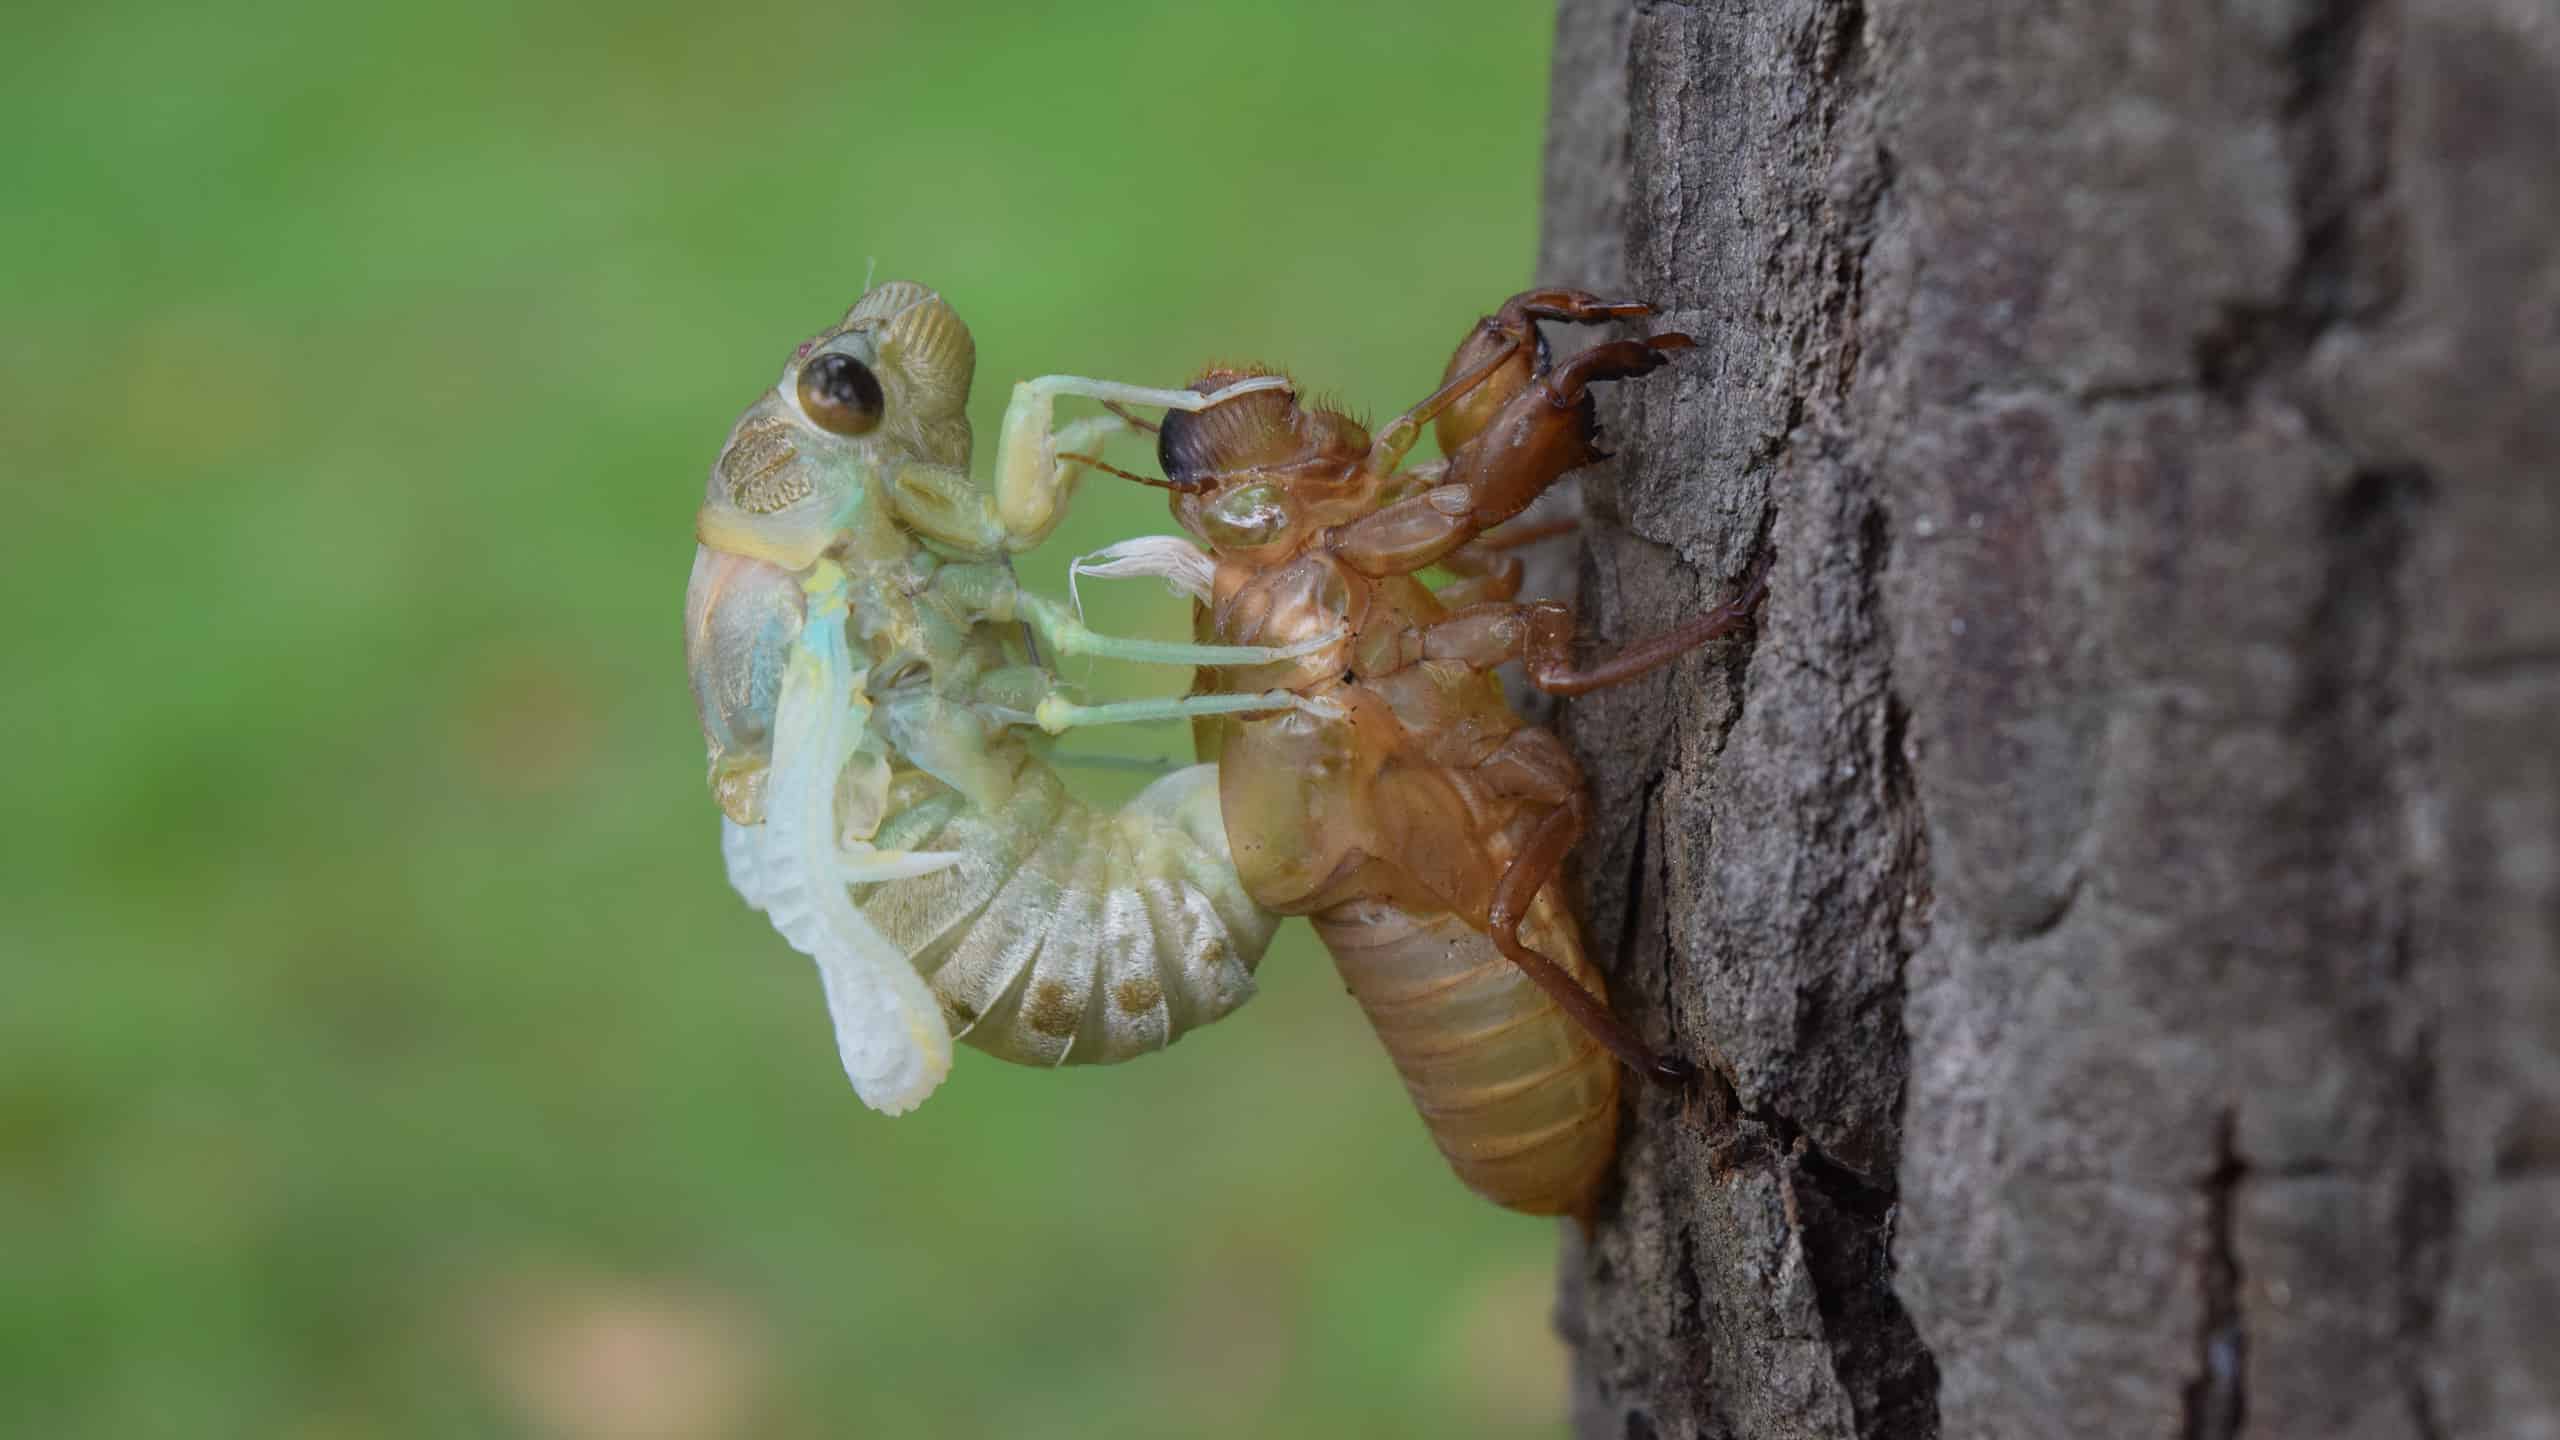 What Makes Up The Exoskeleton Of Insects